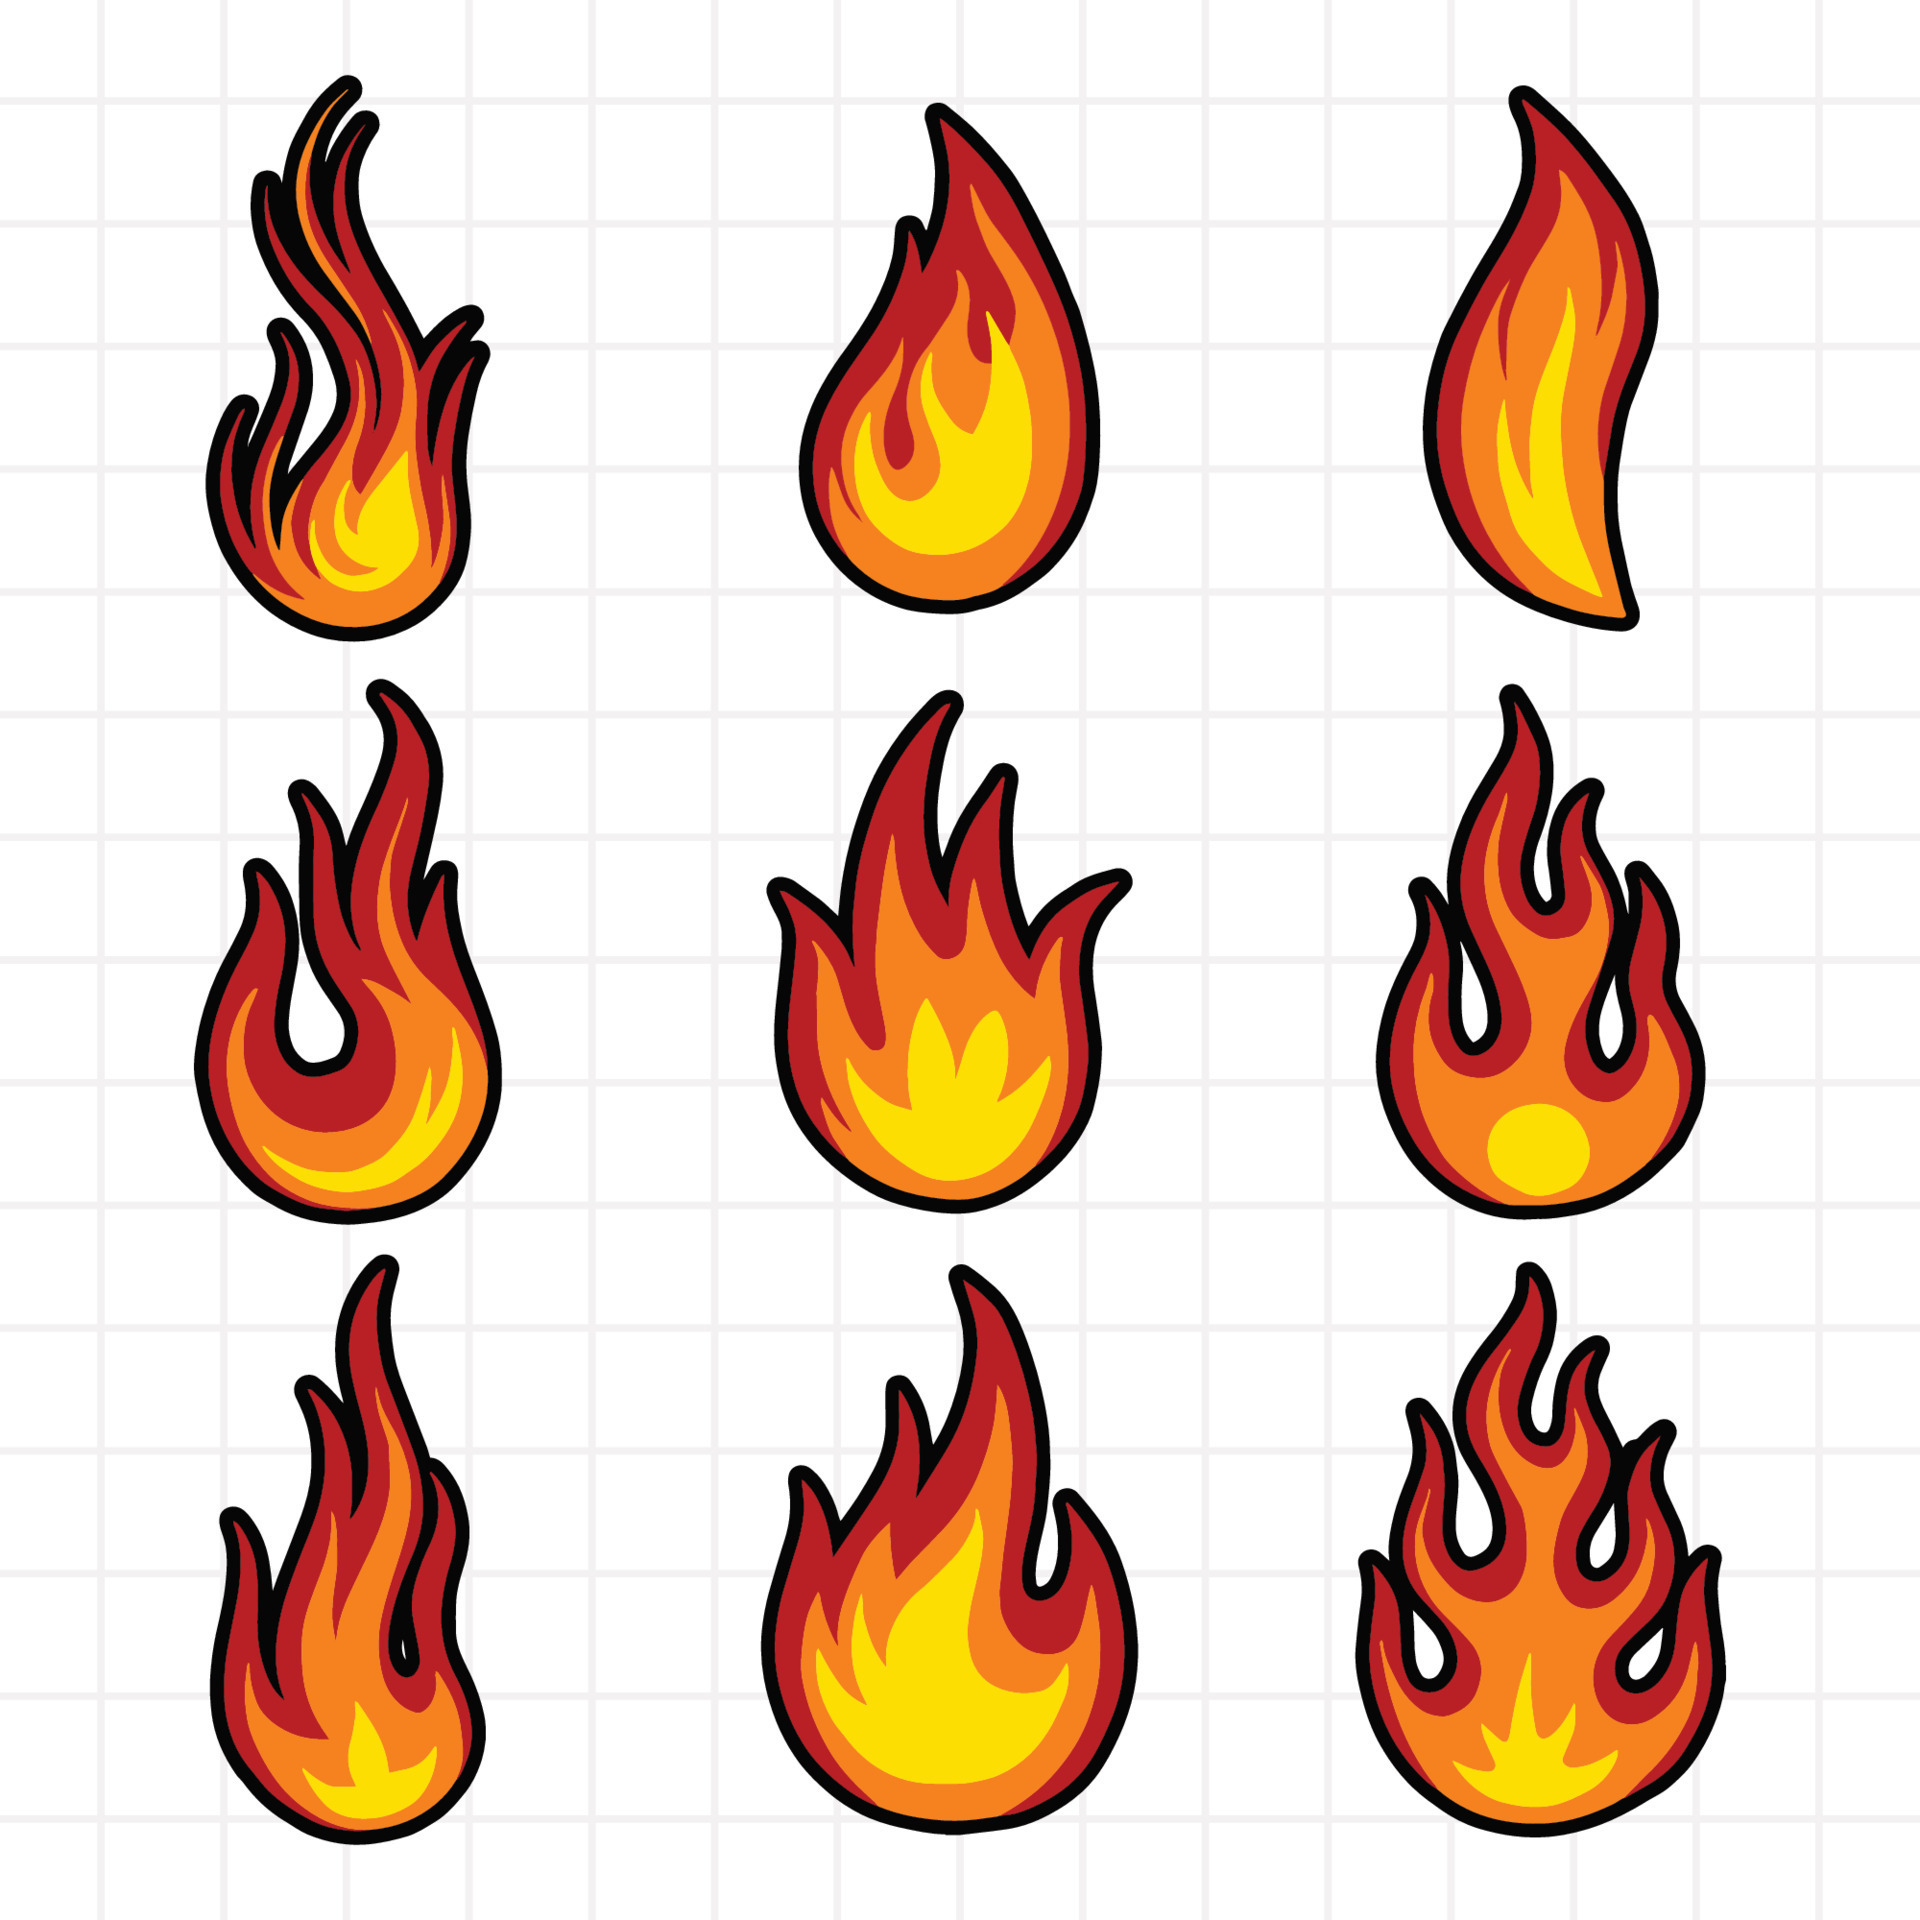 hand-drawn-flame-color-vector-set-illustration-7418496-vector-art-at-vecteezy